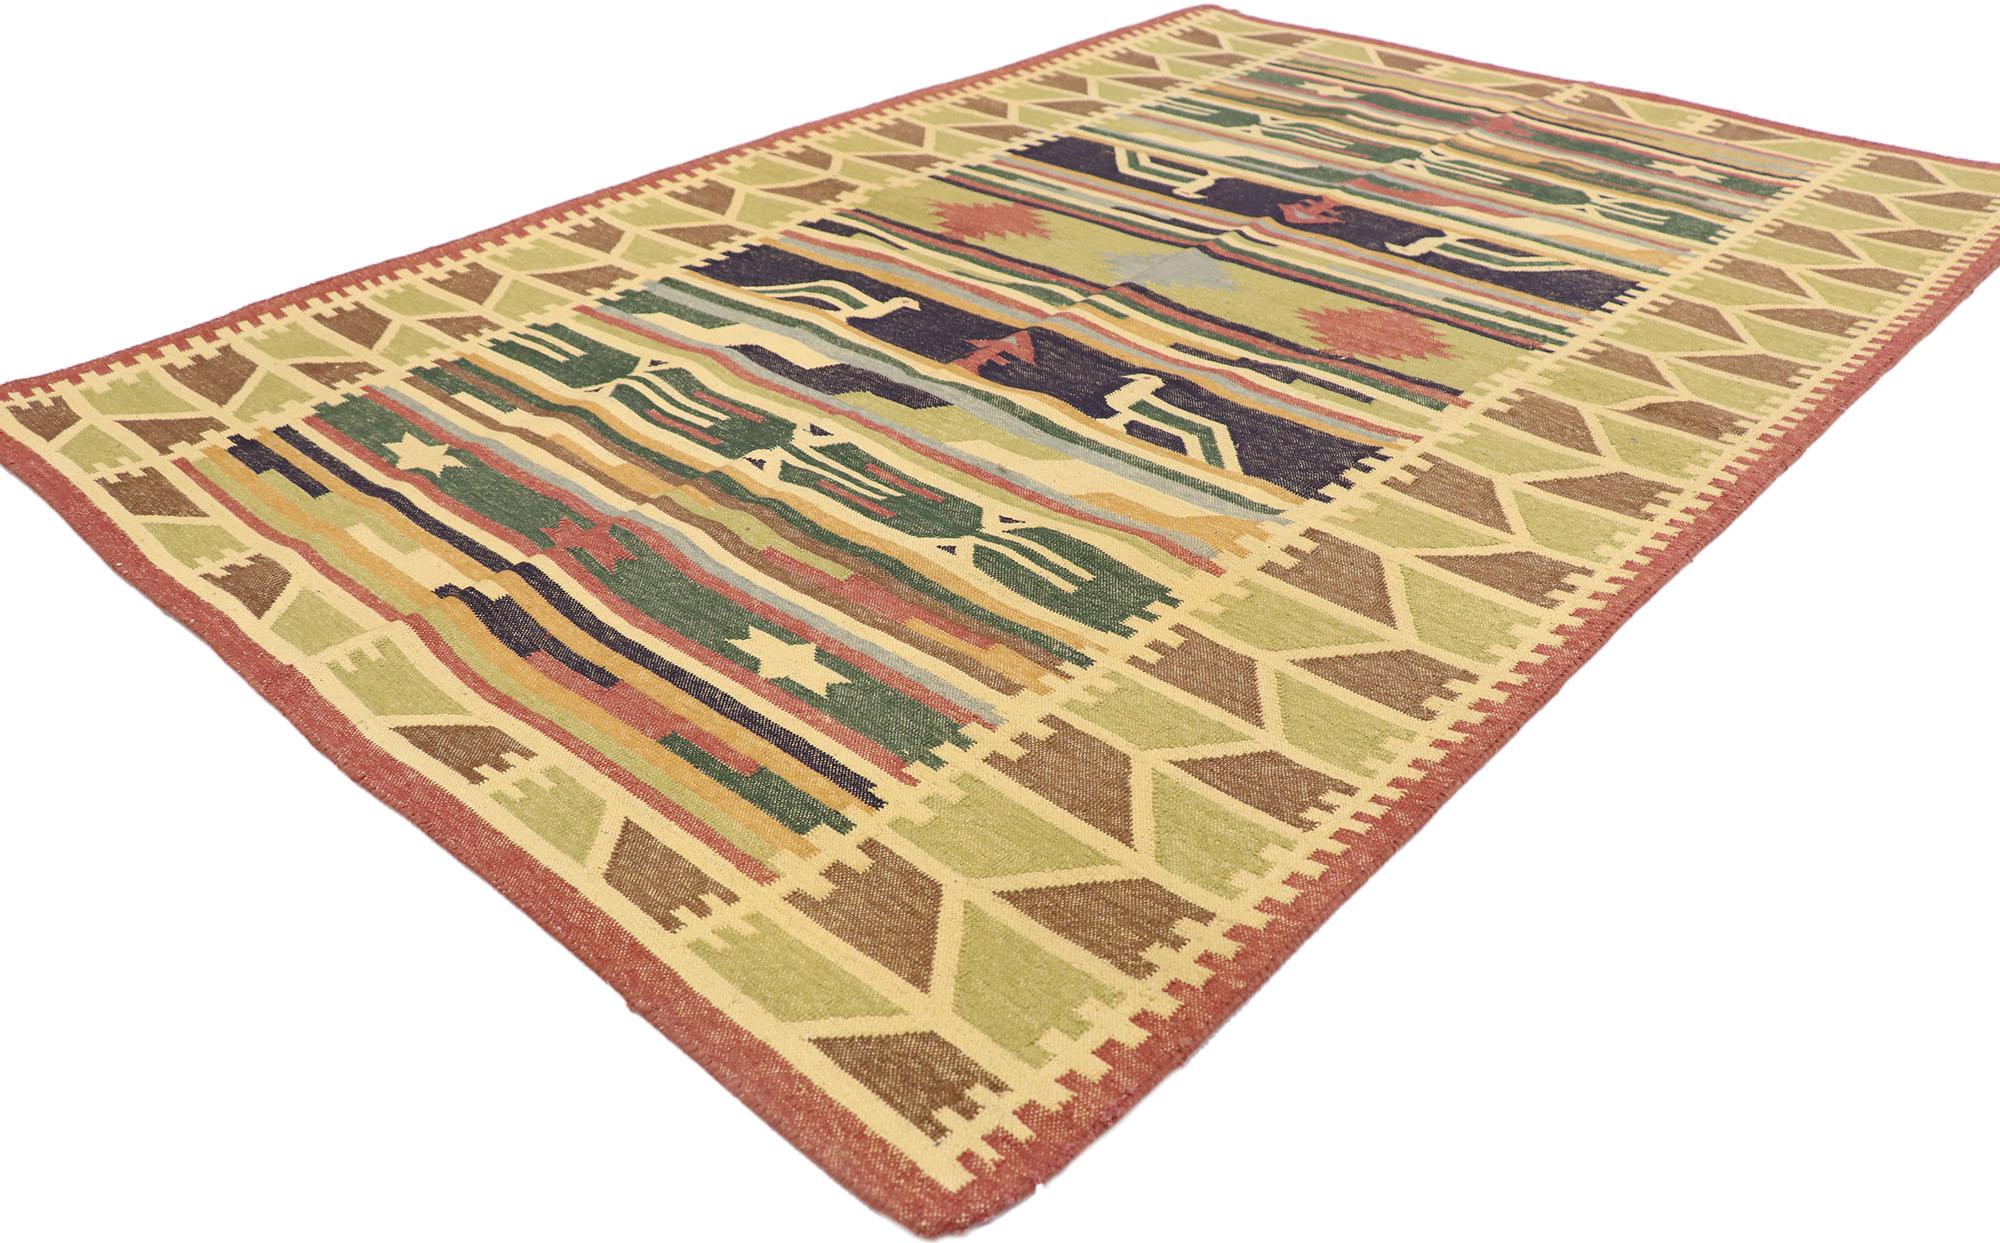 77989 Vintage Indian Stone Wash Dhurrie Rug with Folk Art Tribal Style 03'10 x 05'09. Full of tiny details and a bold expressive design combined with with warm earth-tone colors and folk art tribal style, this hand-woven wool vintage Indian stone